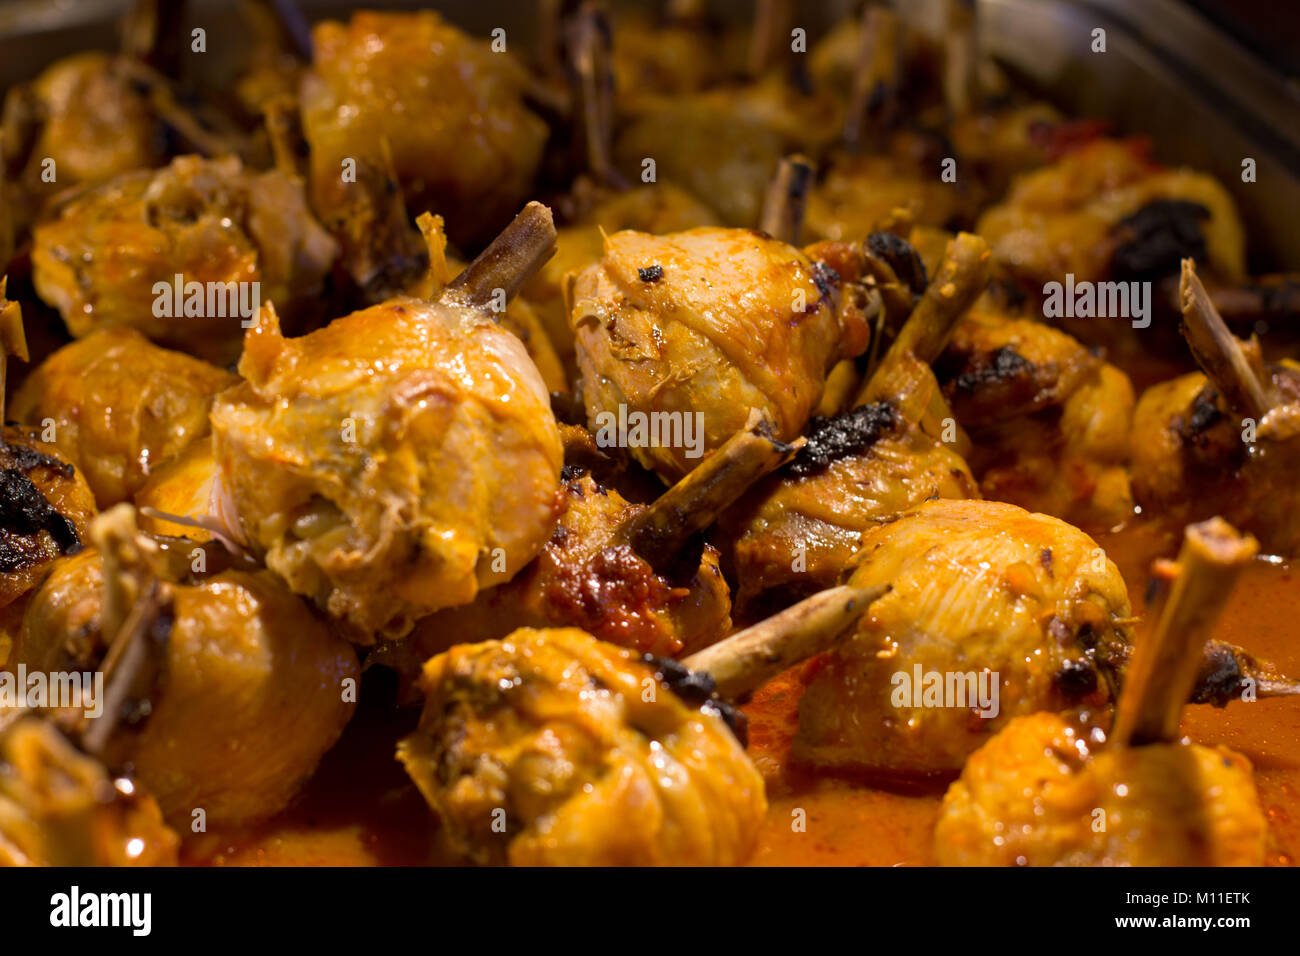 Chicken legs in a sauce, baked on grill Stock Photo